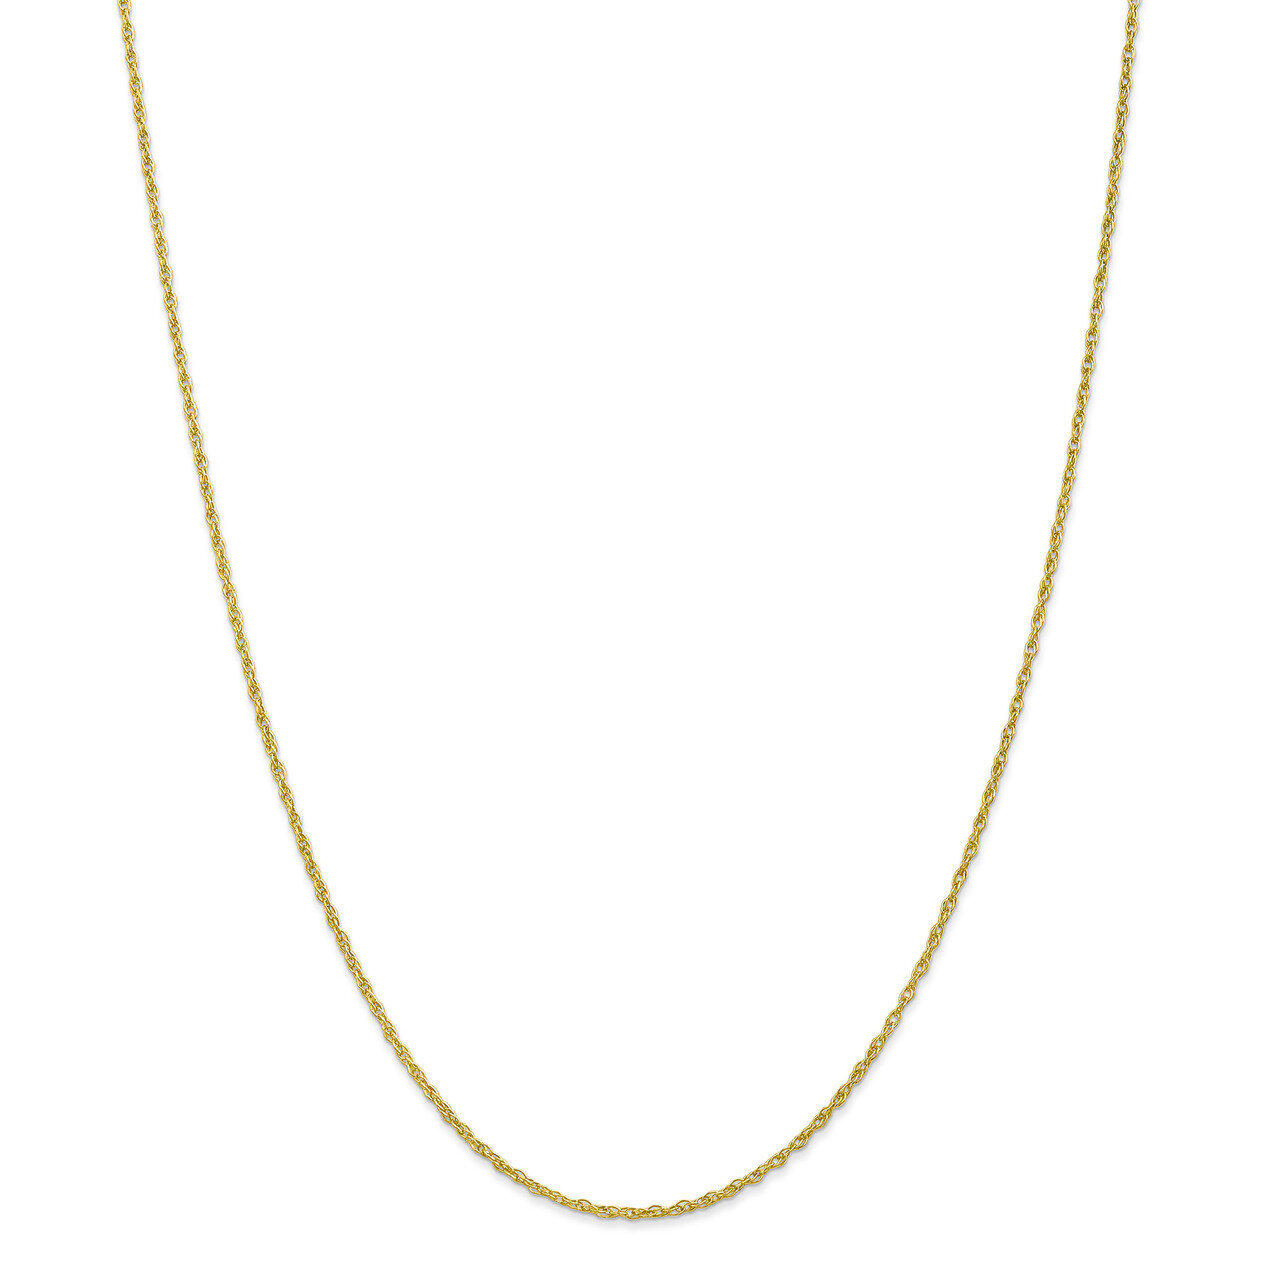 20 Inch 1.3mm Heavy-Baby Rope Chain 10k Gold 10PE6-20